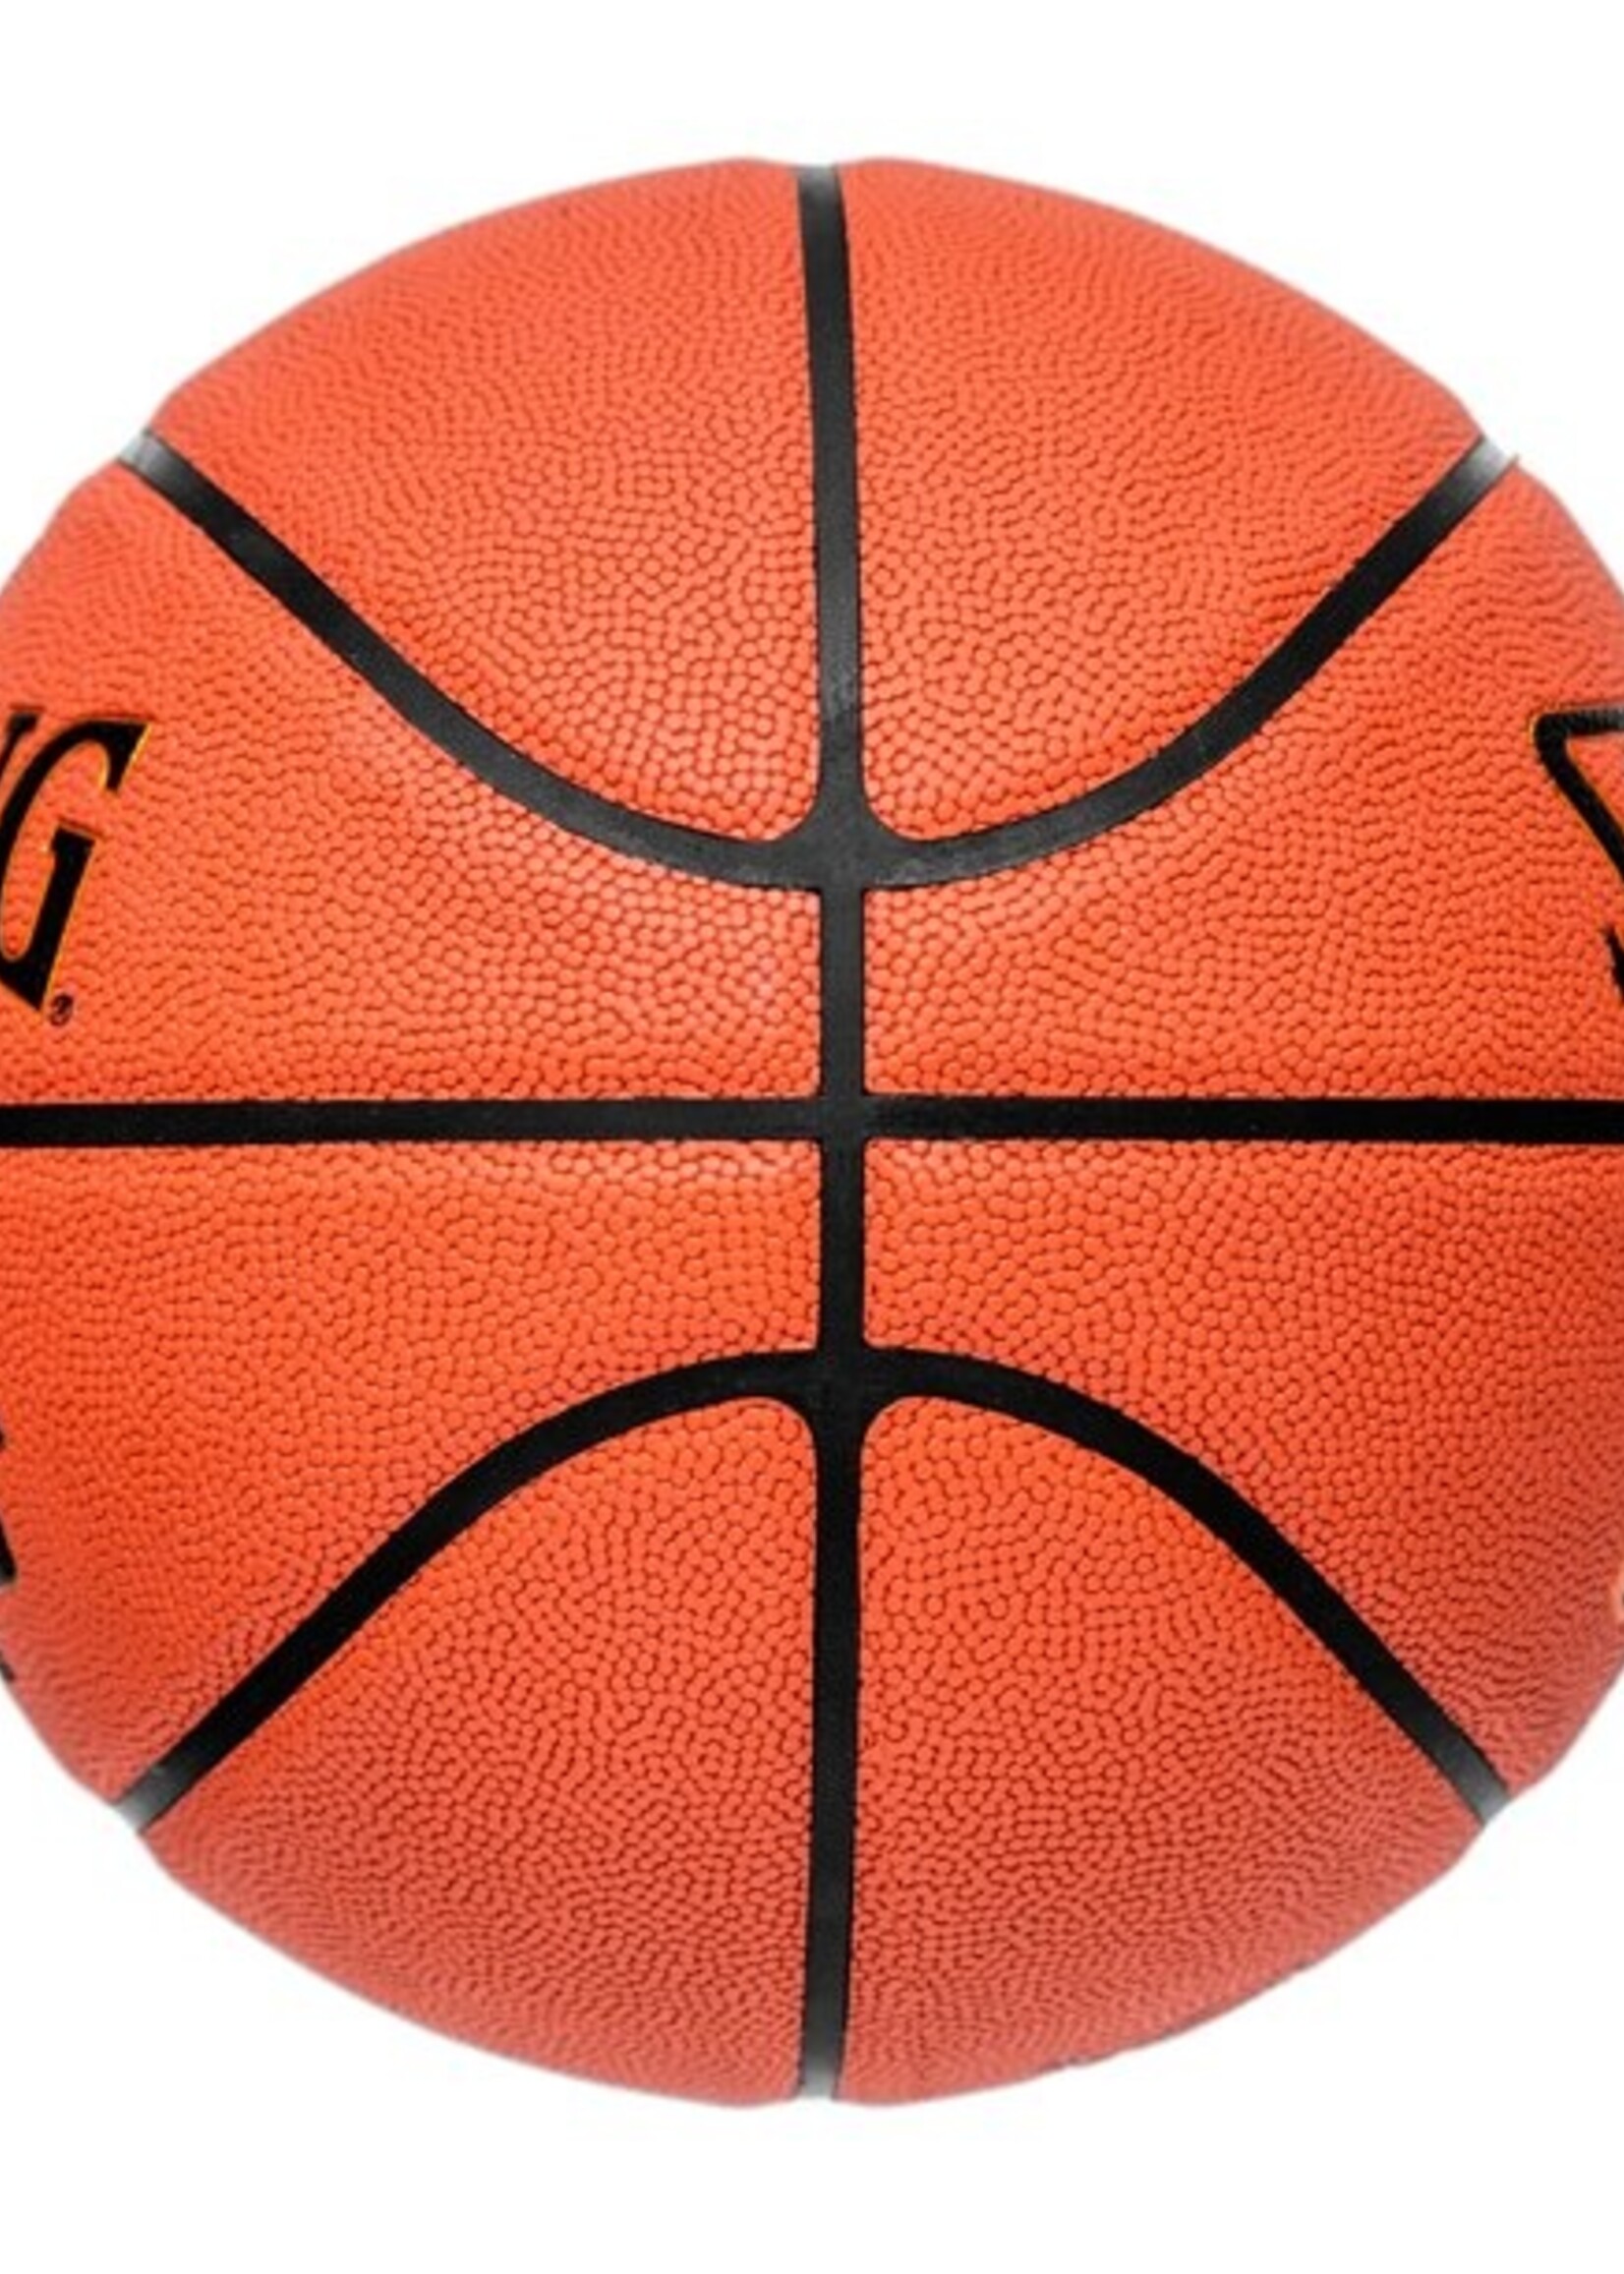 Spalding Excel TF-500 All Surface Basketball